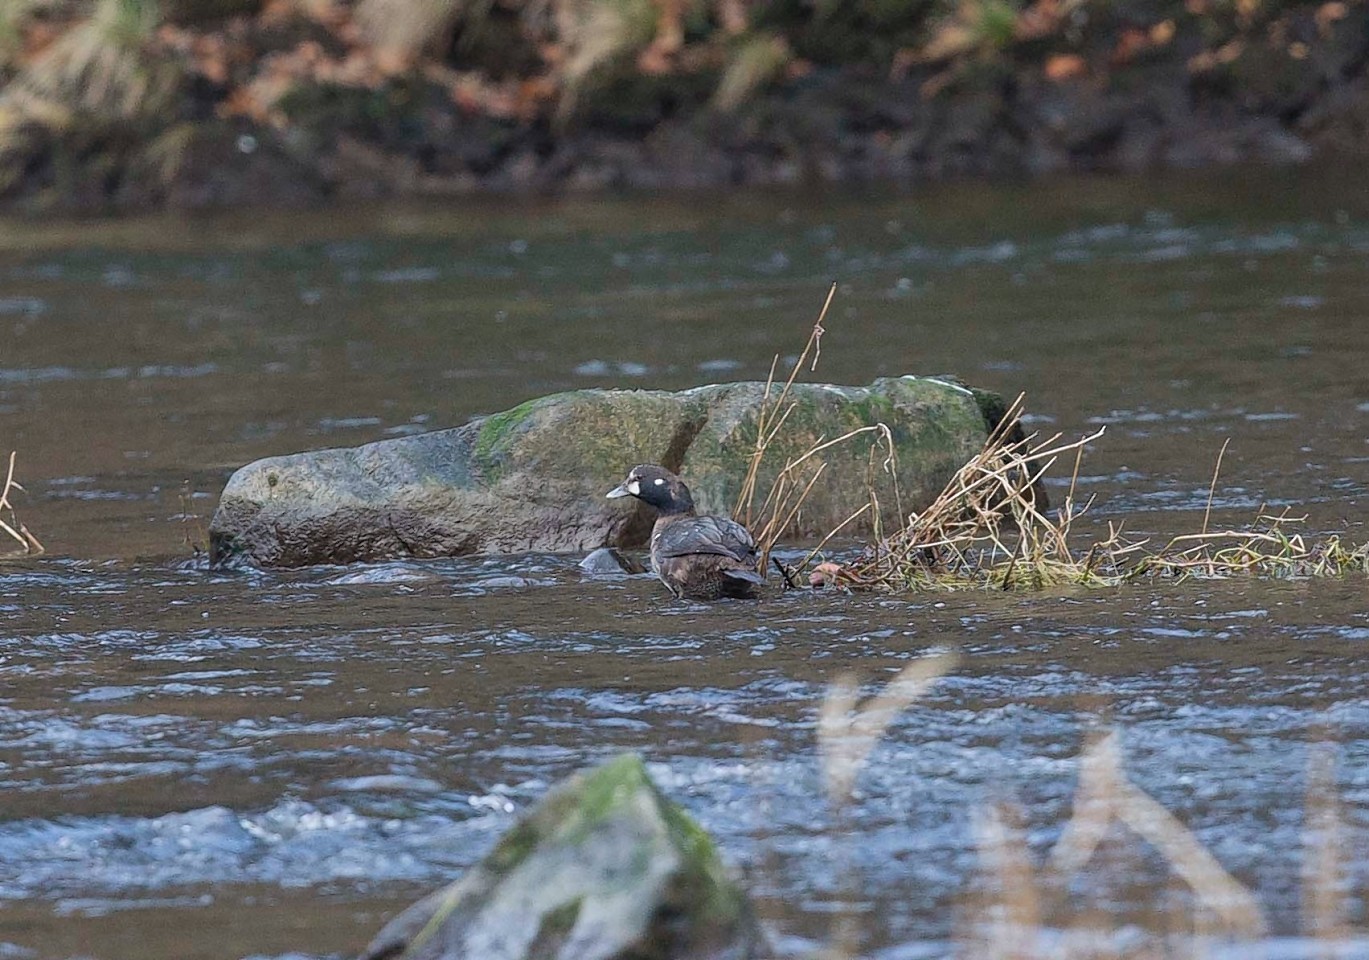 The Harlequin Duck was spotted in the River Don estuary over the weekend